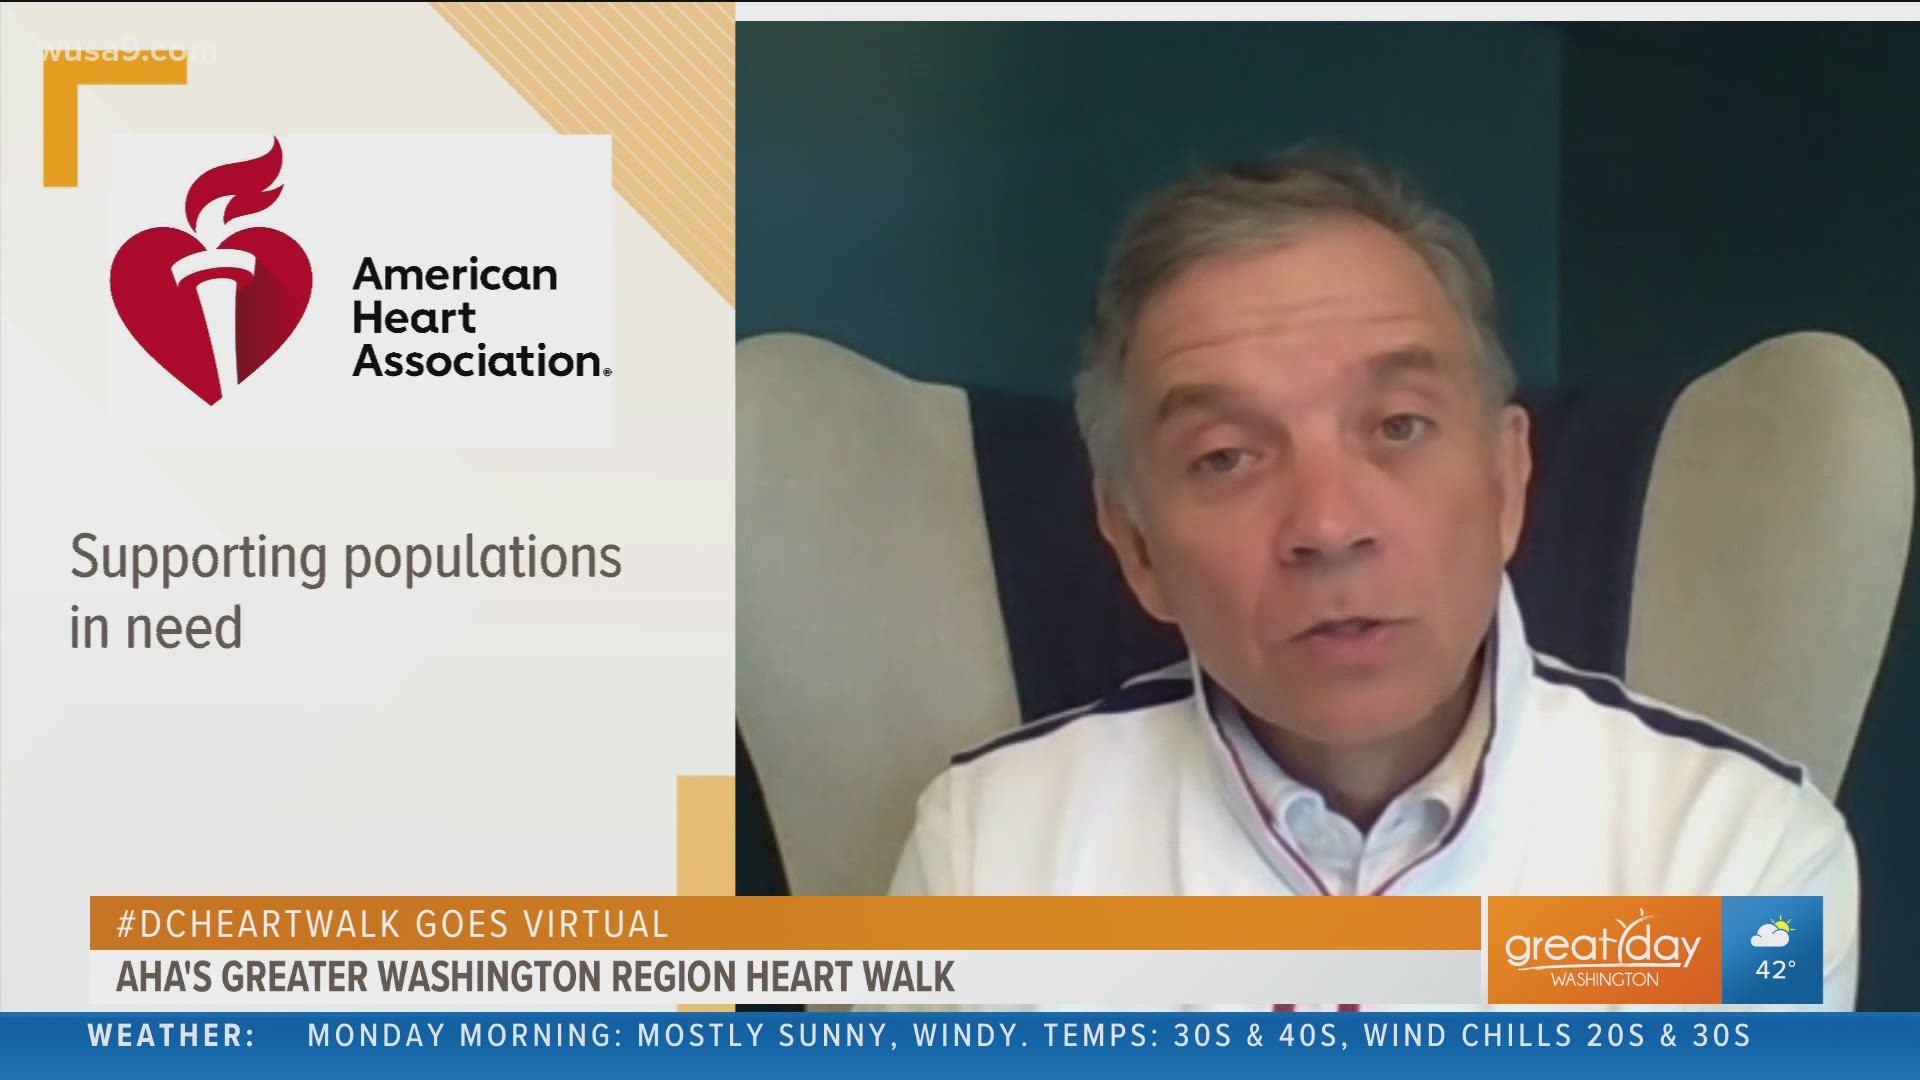 50 million people in the U.S. are at higher risk for heart disease. The AHA Greater Washington Region Heart Walk goes virtual to raise money for research & care.